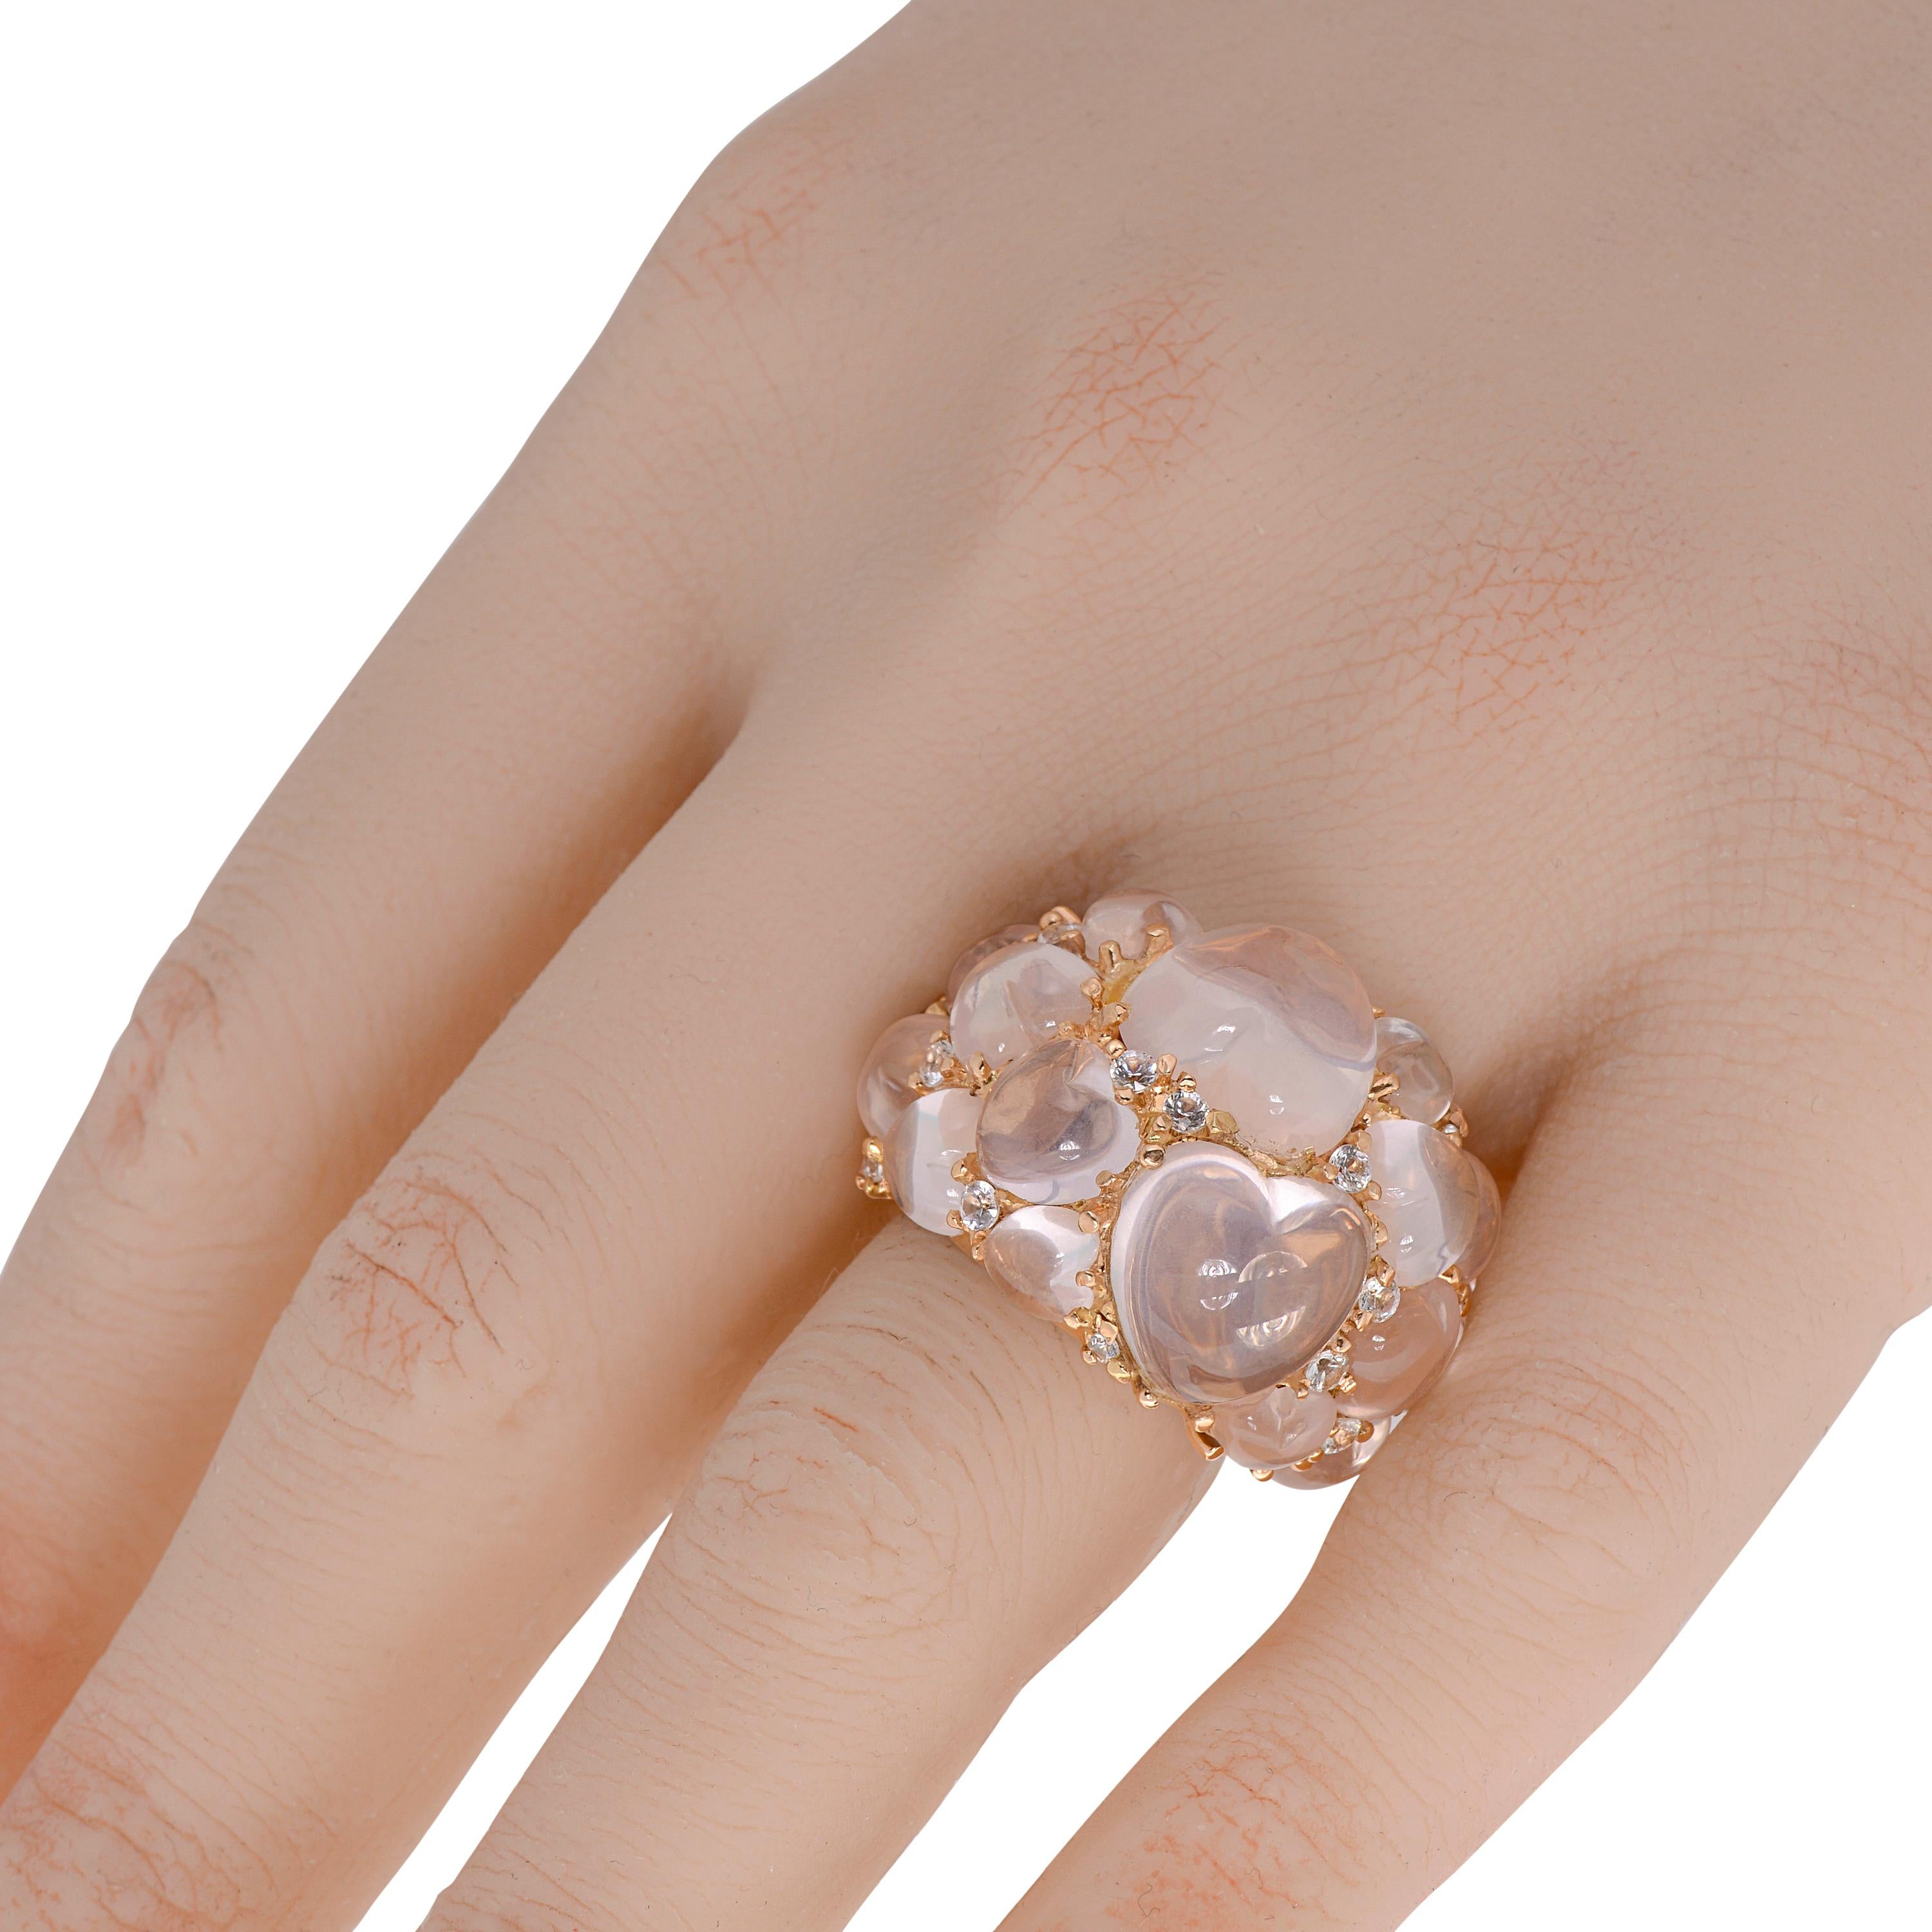 Mimi Milano 18K rose gold cocktail ring features shimmering prong set 0.75ct. tw. sapphire adorning 20.96ct. tw. cabochon pink quartz hearts. The ring size is 7.75. The band width is 1/4